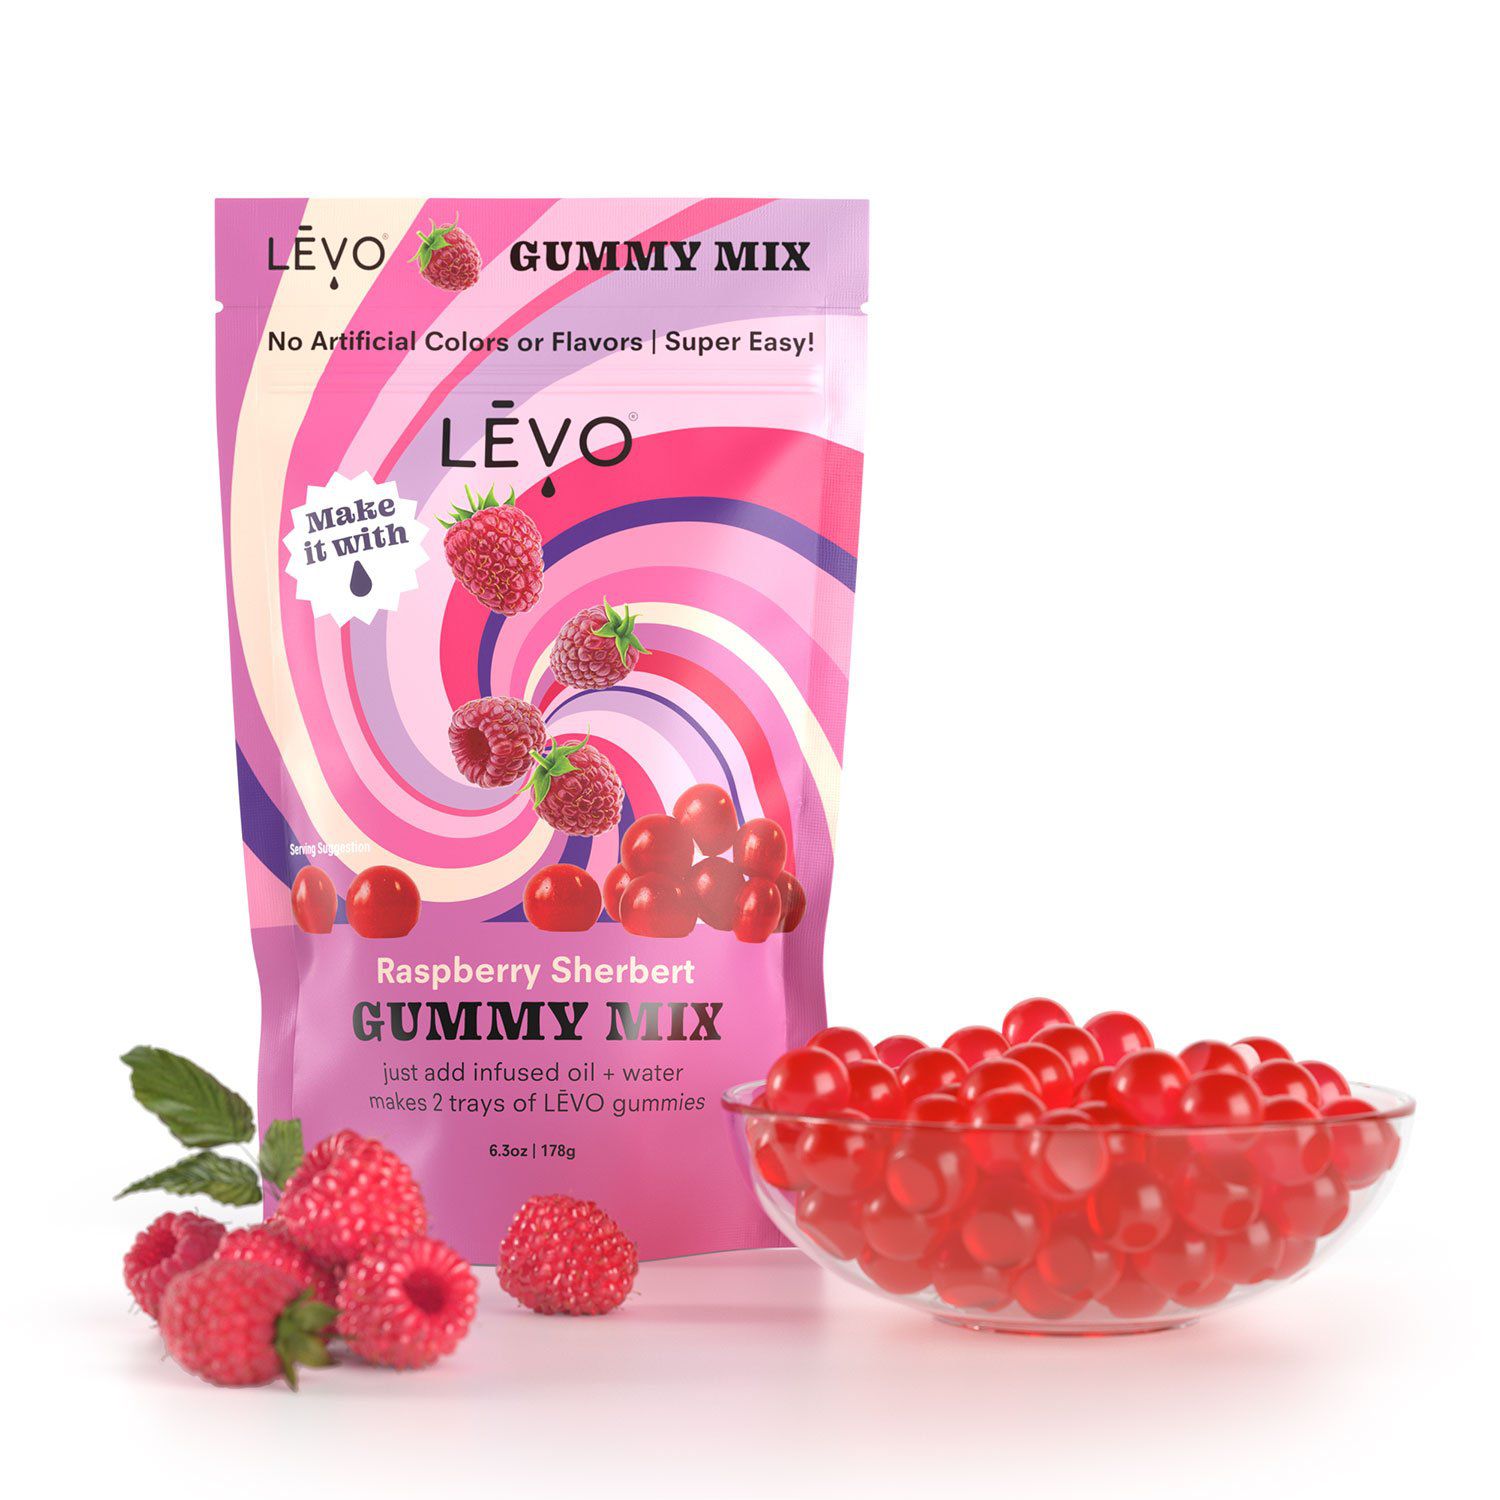 Everyone agrees: our Gummy Mixer is the best 🏆 - Levo